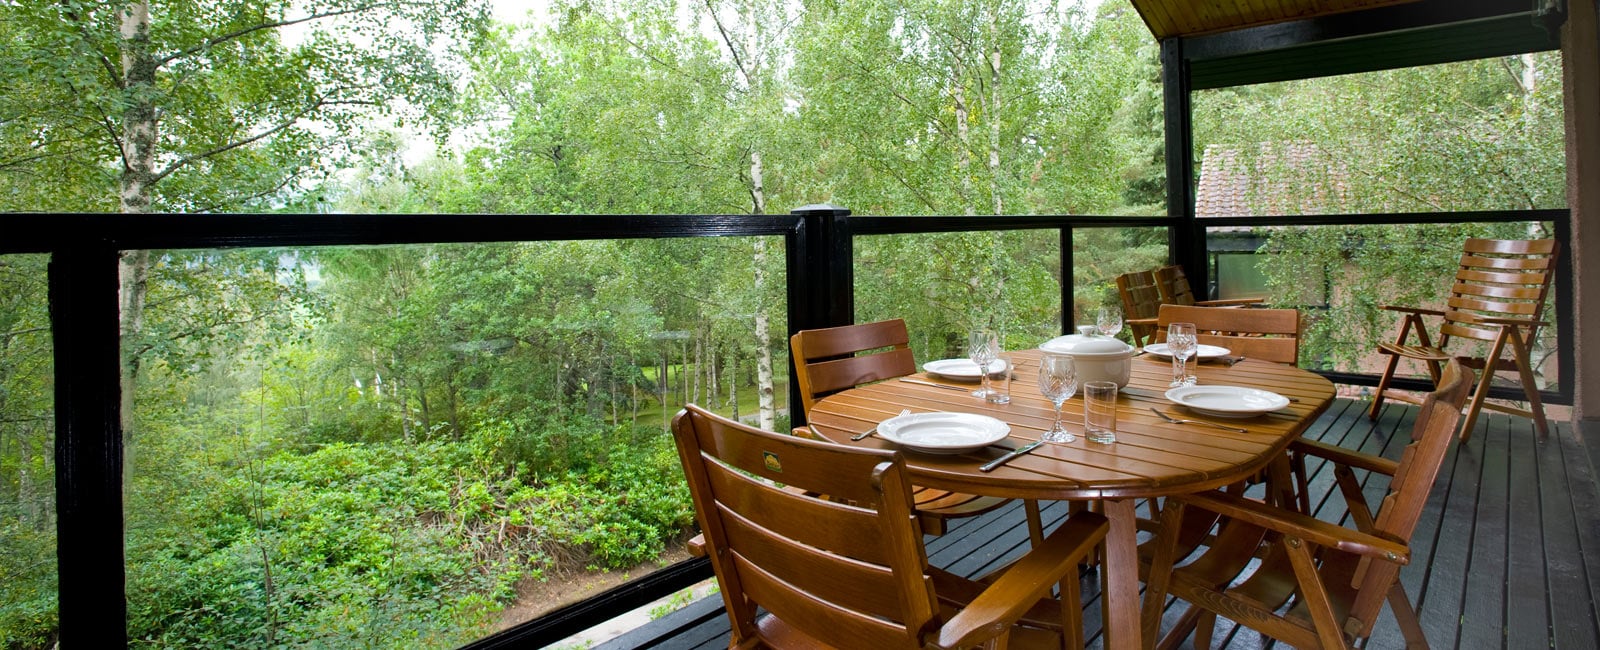 Terrace at Craigendarroch Lodges, Managed by Hilton Grand Vacations in Royal Deeside, Scotland